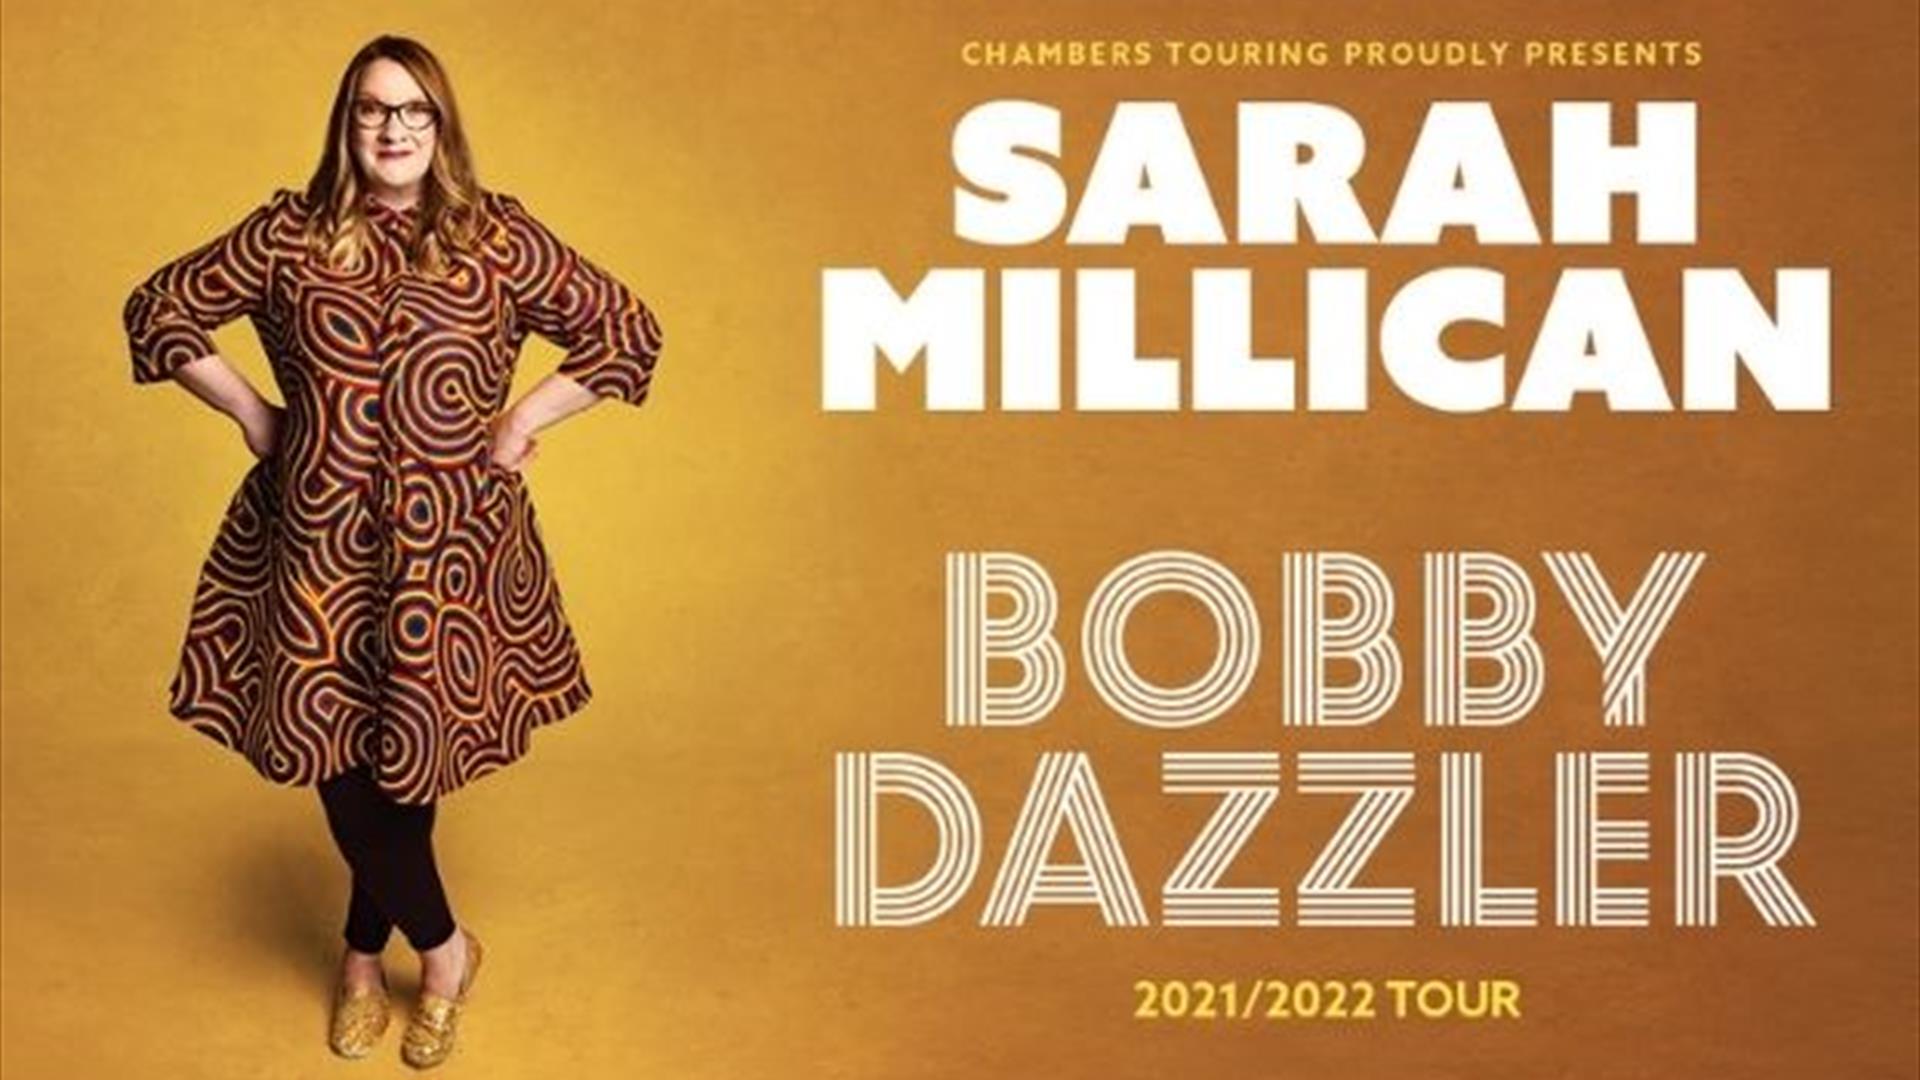 Sarah Millican standing with her hands on her hips in a loudly patterned dress, beside her in large text- 'SARAH MILLICAN- BOBBY DAZZLER' against a wa